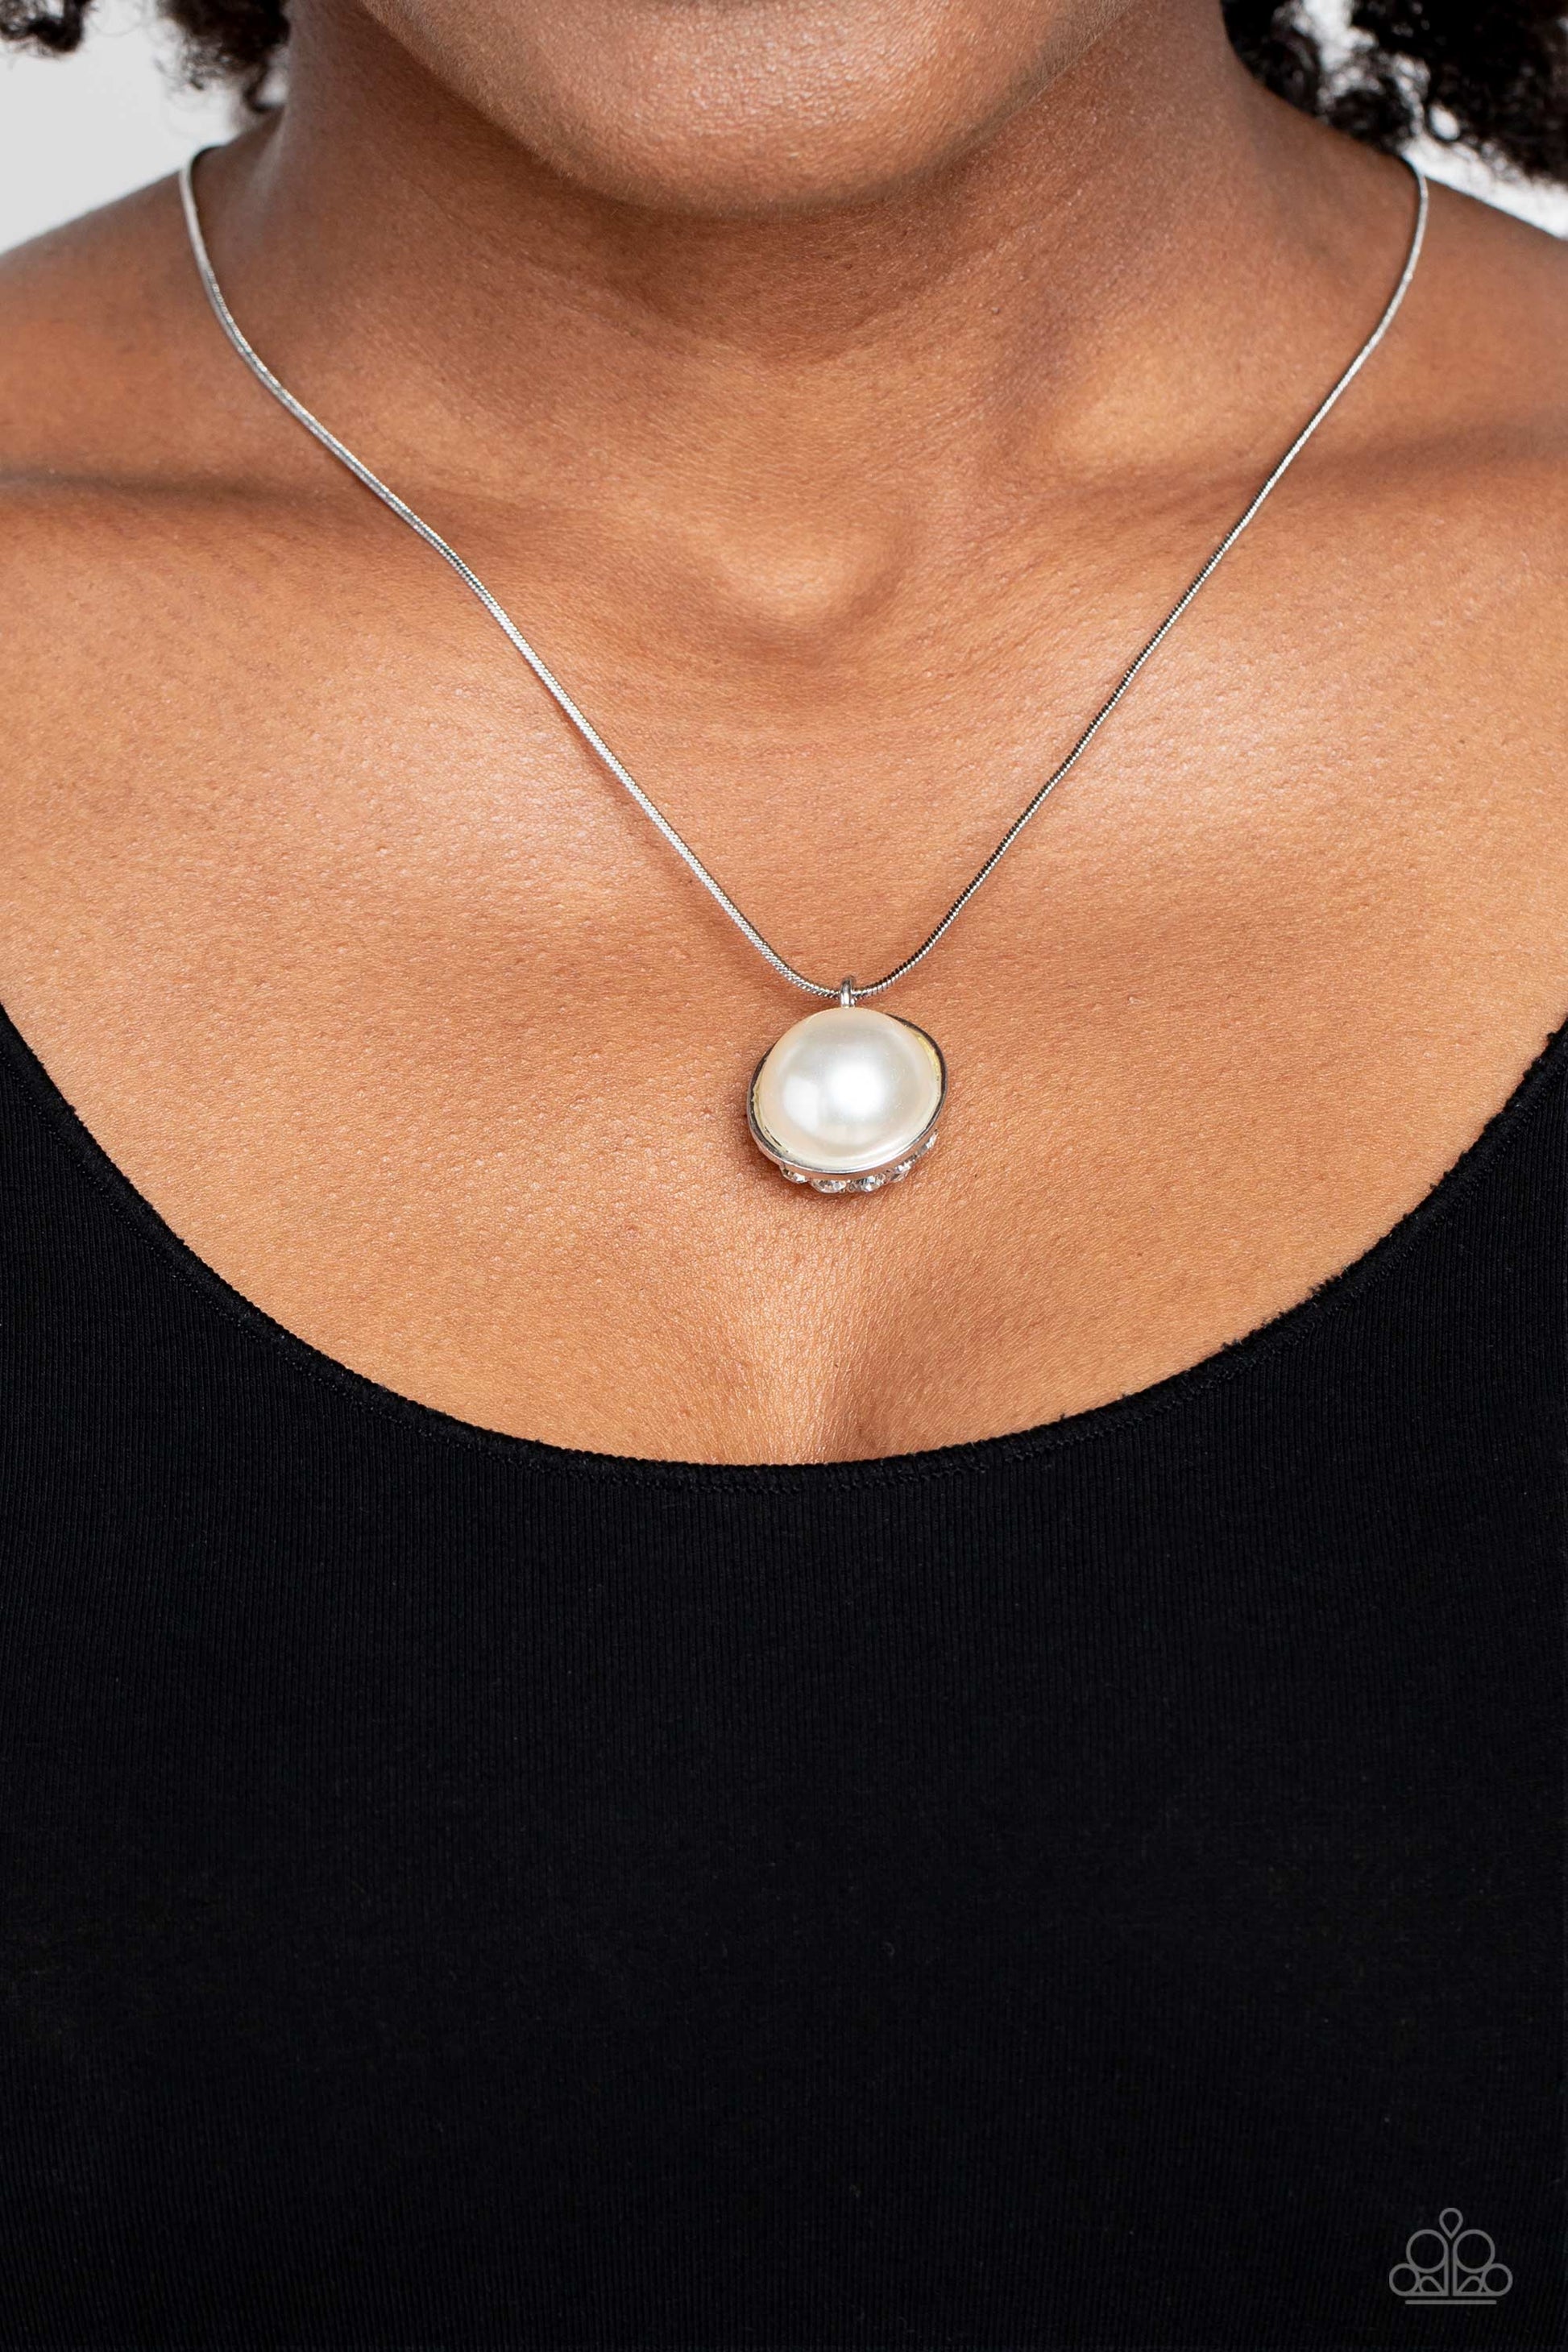 Haute Hybrid - White Pearl and Silver Necklace - Paparazzi Accessories - Cascading from a shiny silver snake chain, a sparkly white rhinestone-encrusted ornament and a classic white pearl meet to create a half-and-half refined pendant. 